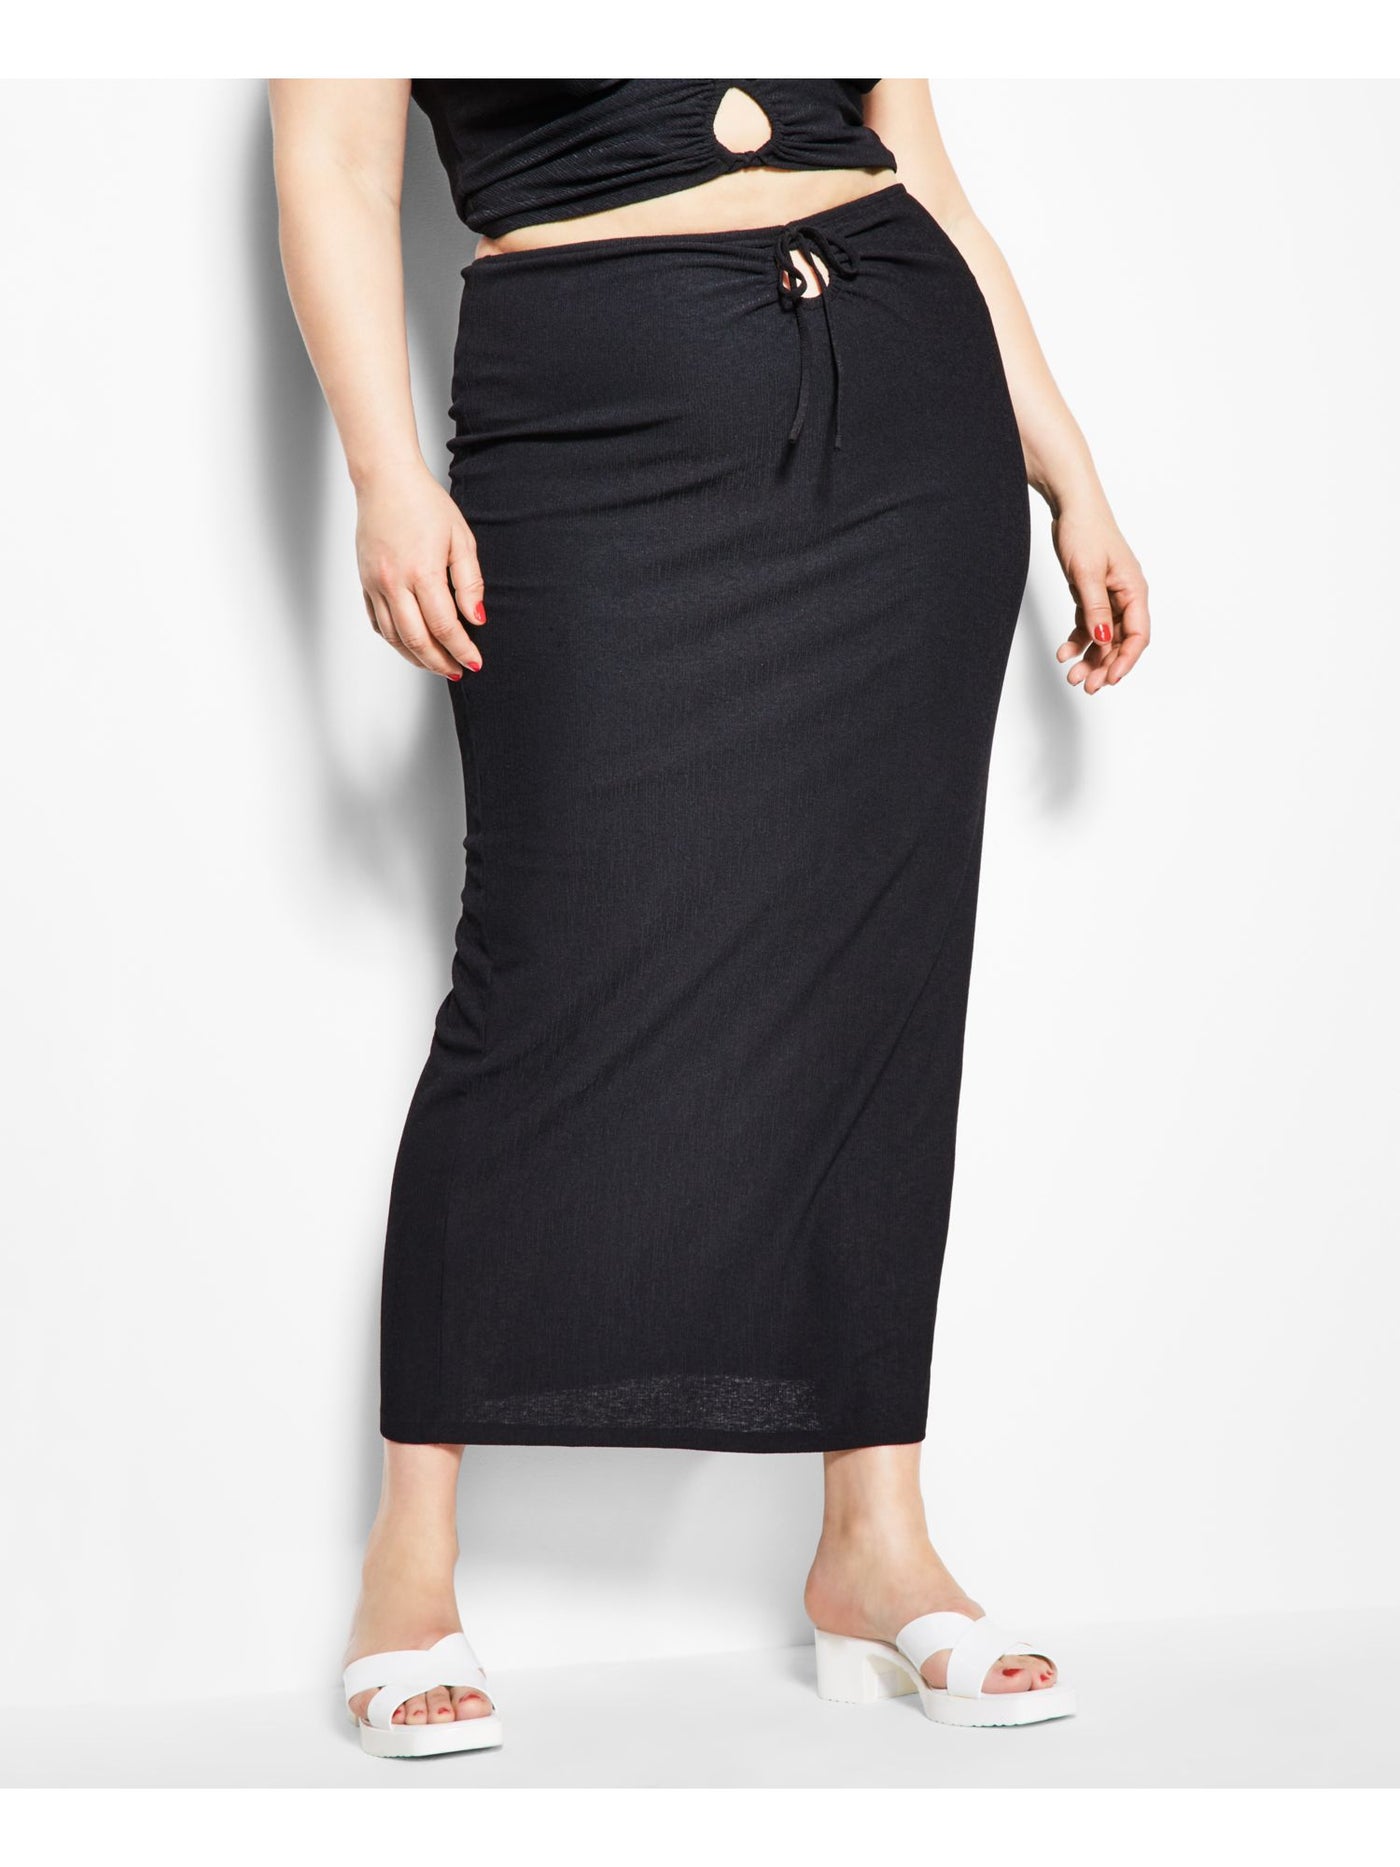 ROYALTY BY MALUMA Womens Black Ribbed Cut Out Pull-on Tie Detail Maxi Pencil Skirt M